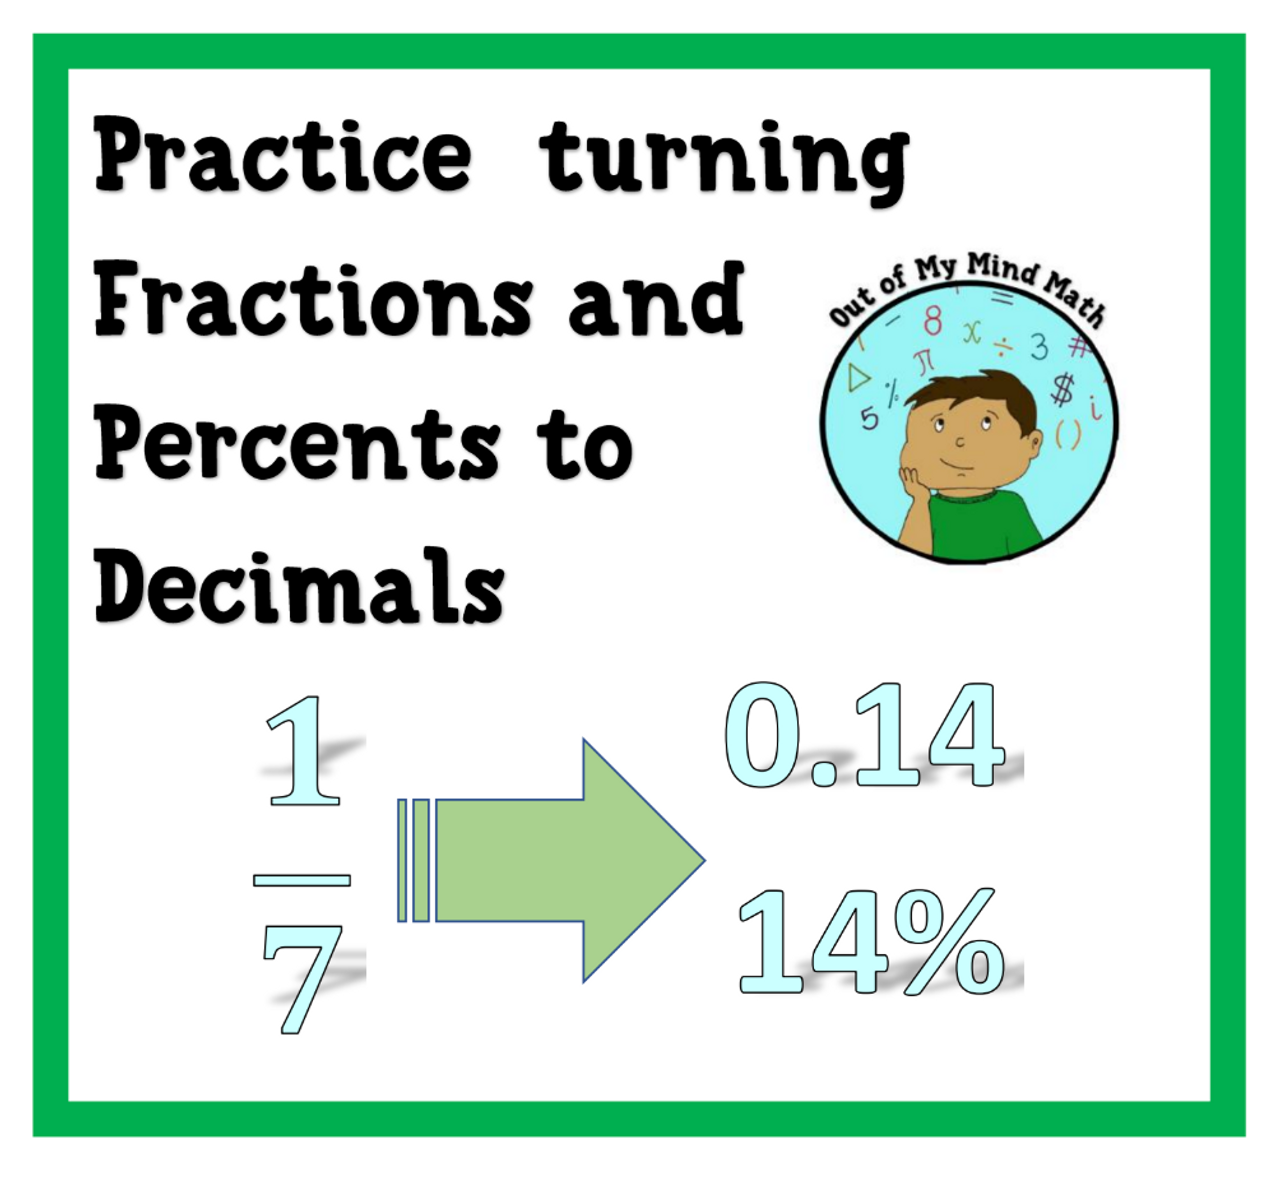 Practice Turning Fractions and Percents to Decimals